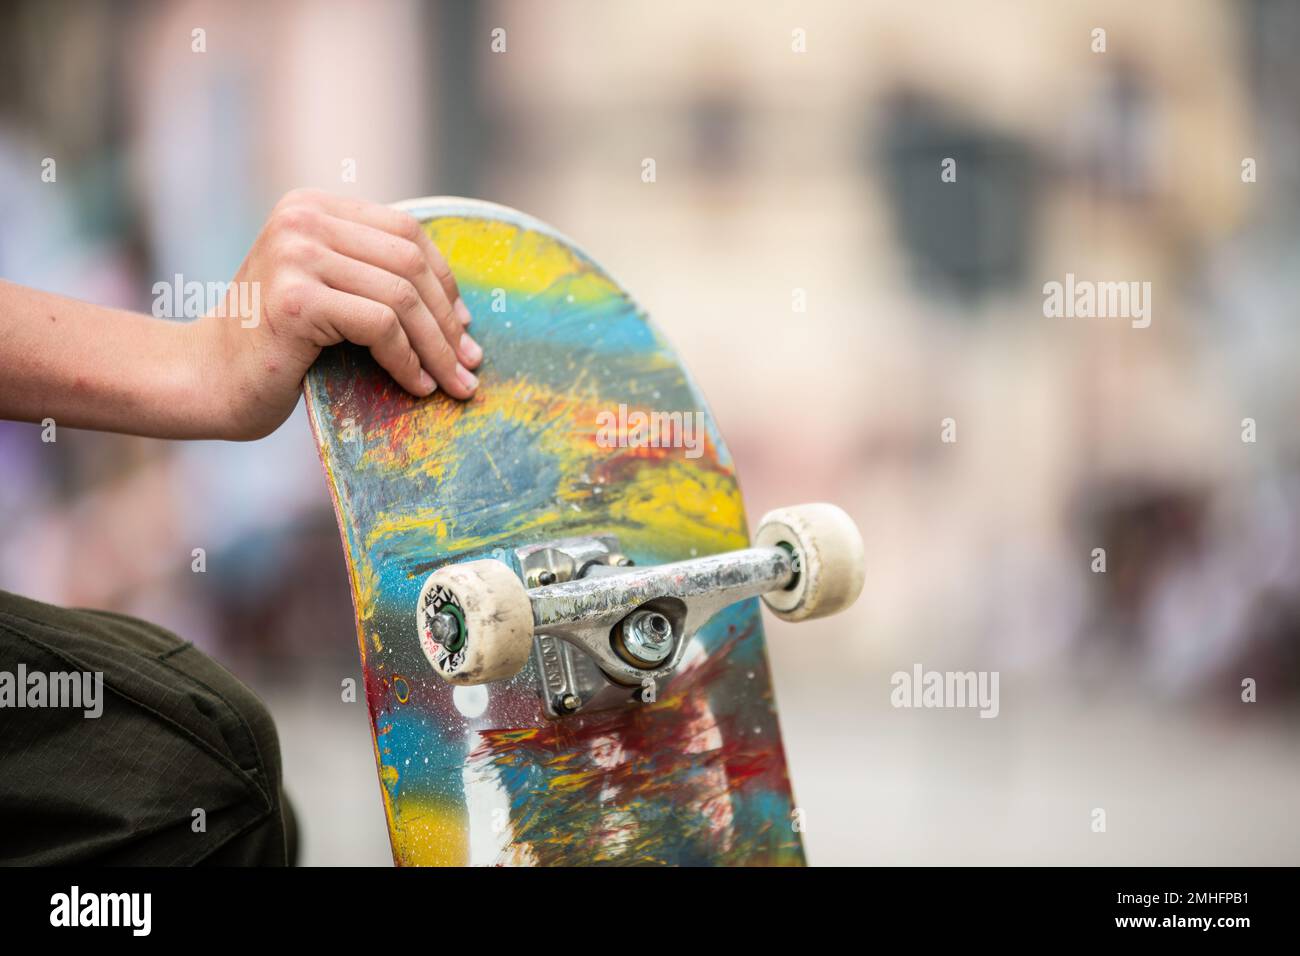 Rottweil, Germany. 09th July, 2016. A skater holds a skateboard during a  skate contest. Credit: Silas Stein/dpa/Alamy Live News Stock Photo - Alamy